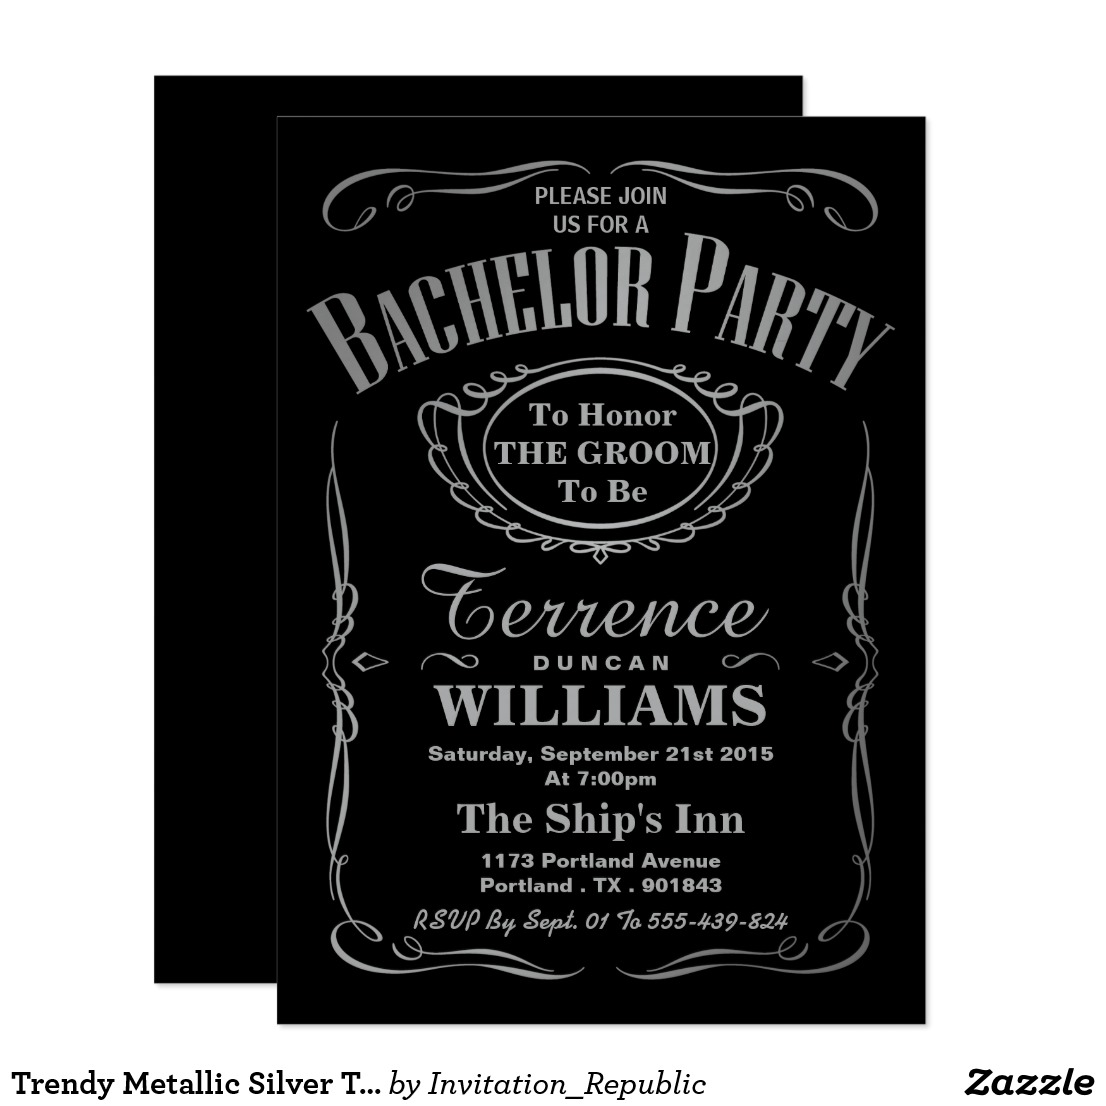 Bachelor Party Invitations 